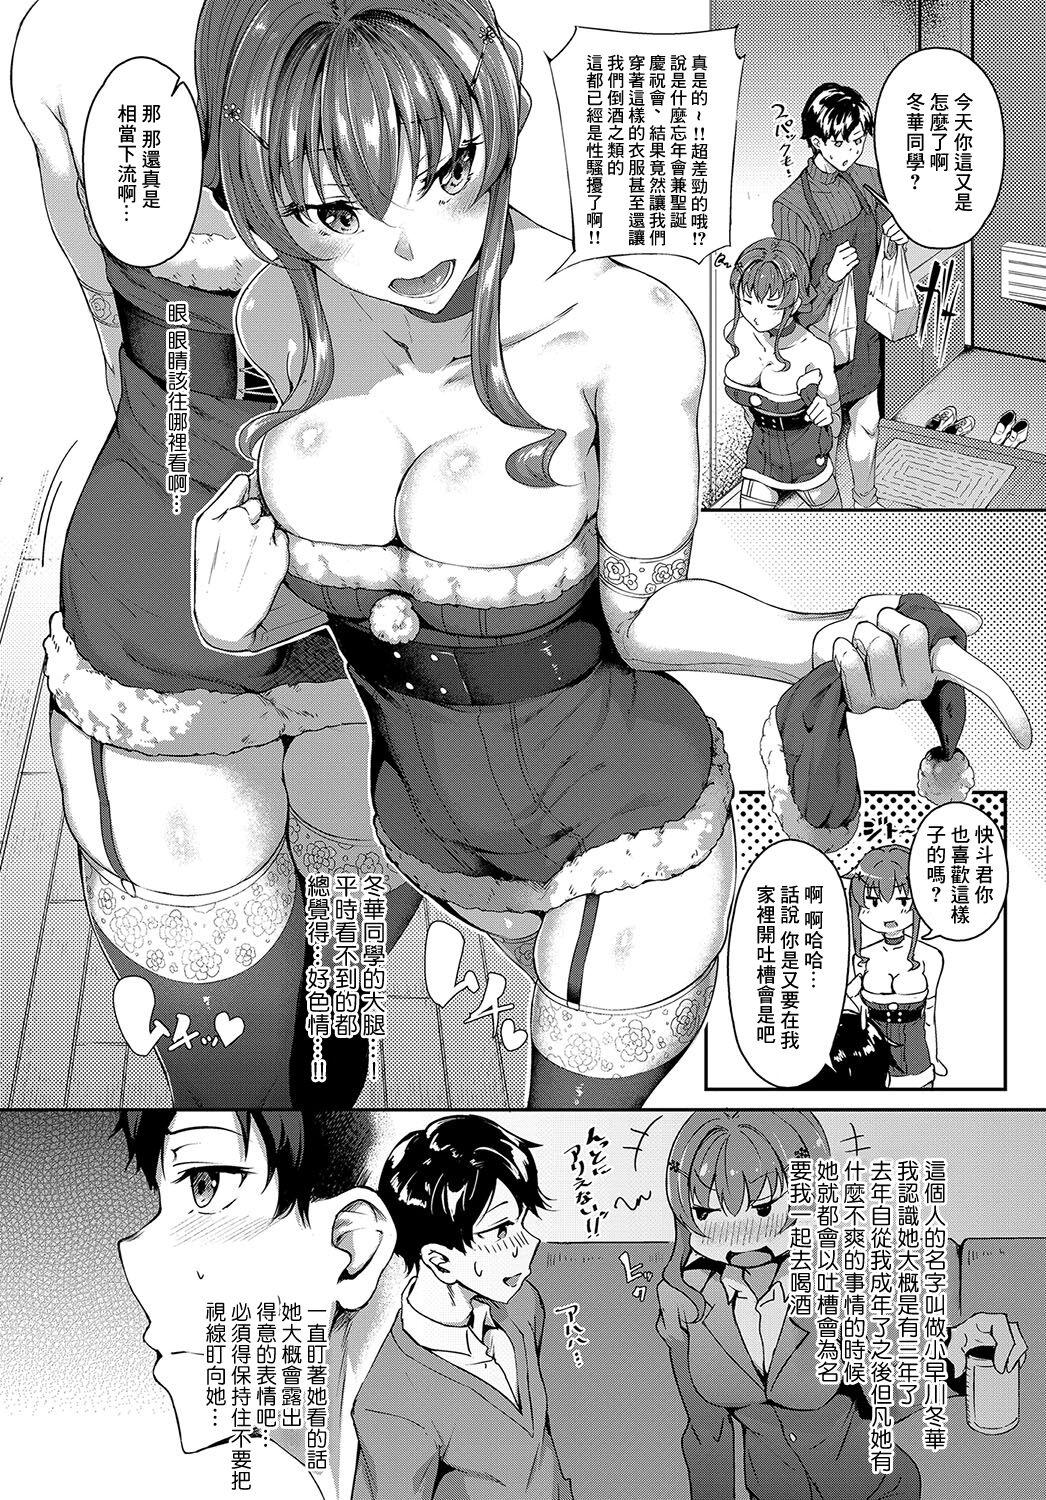 Indonesia Gift to Xmas Uncensored - Page 2